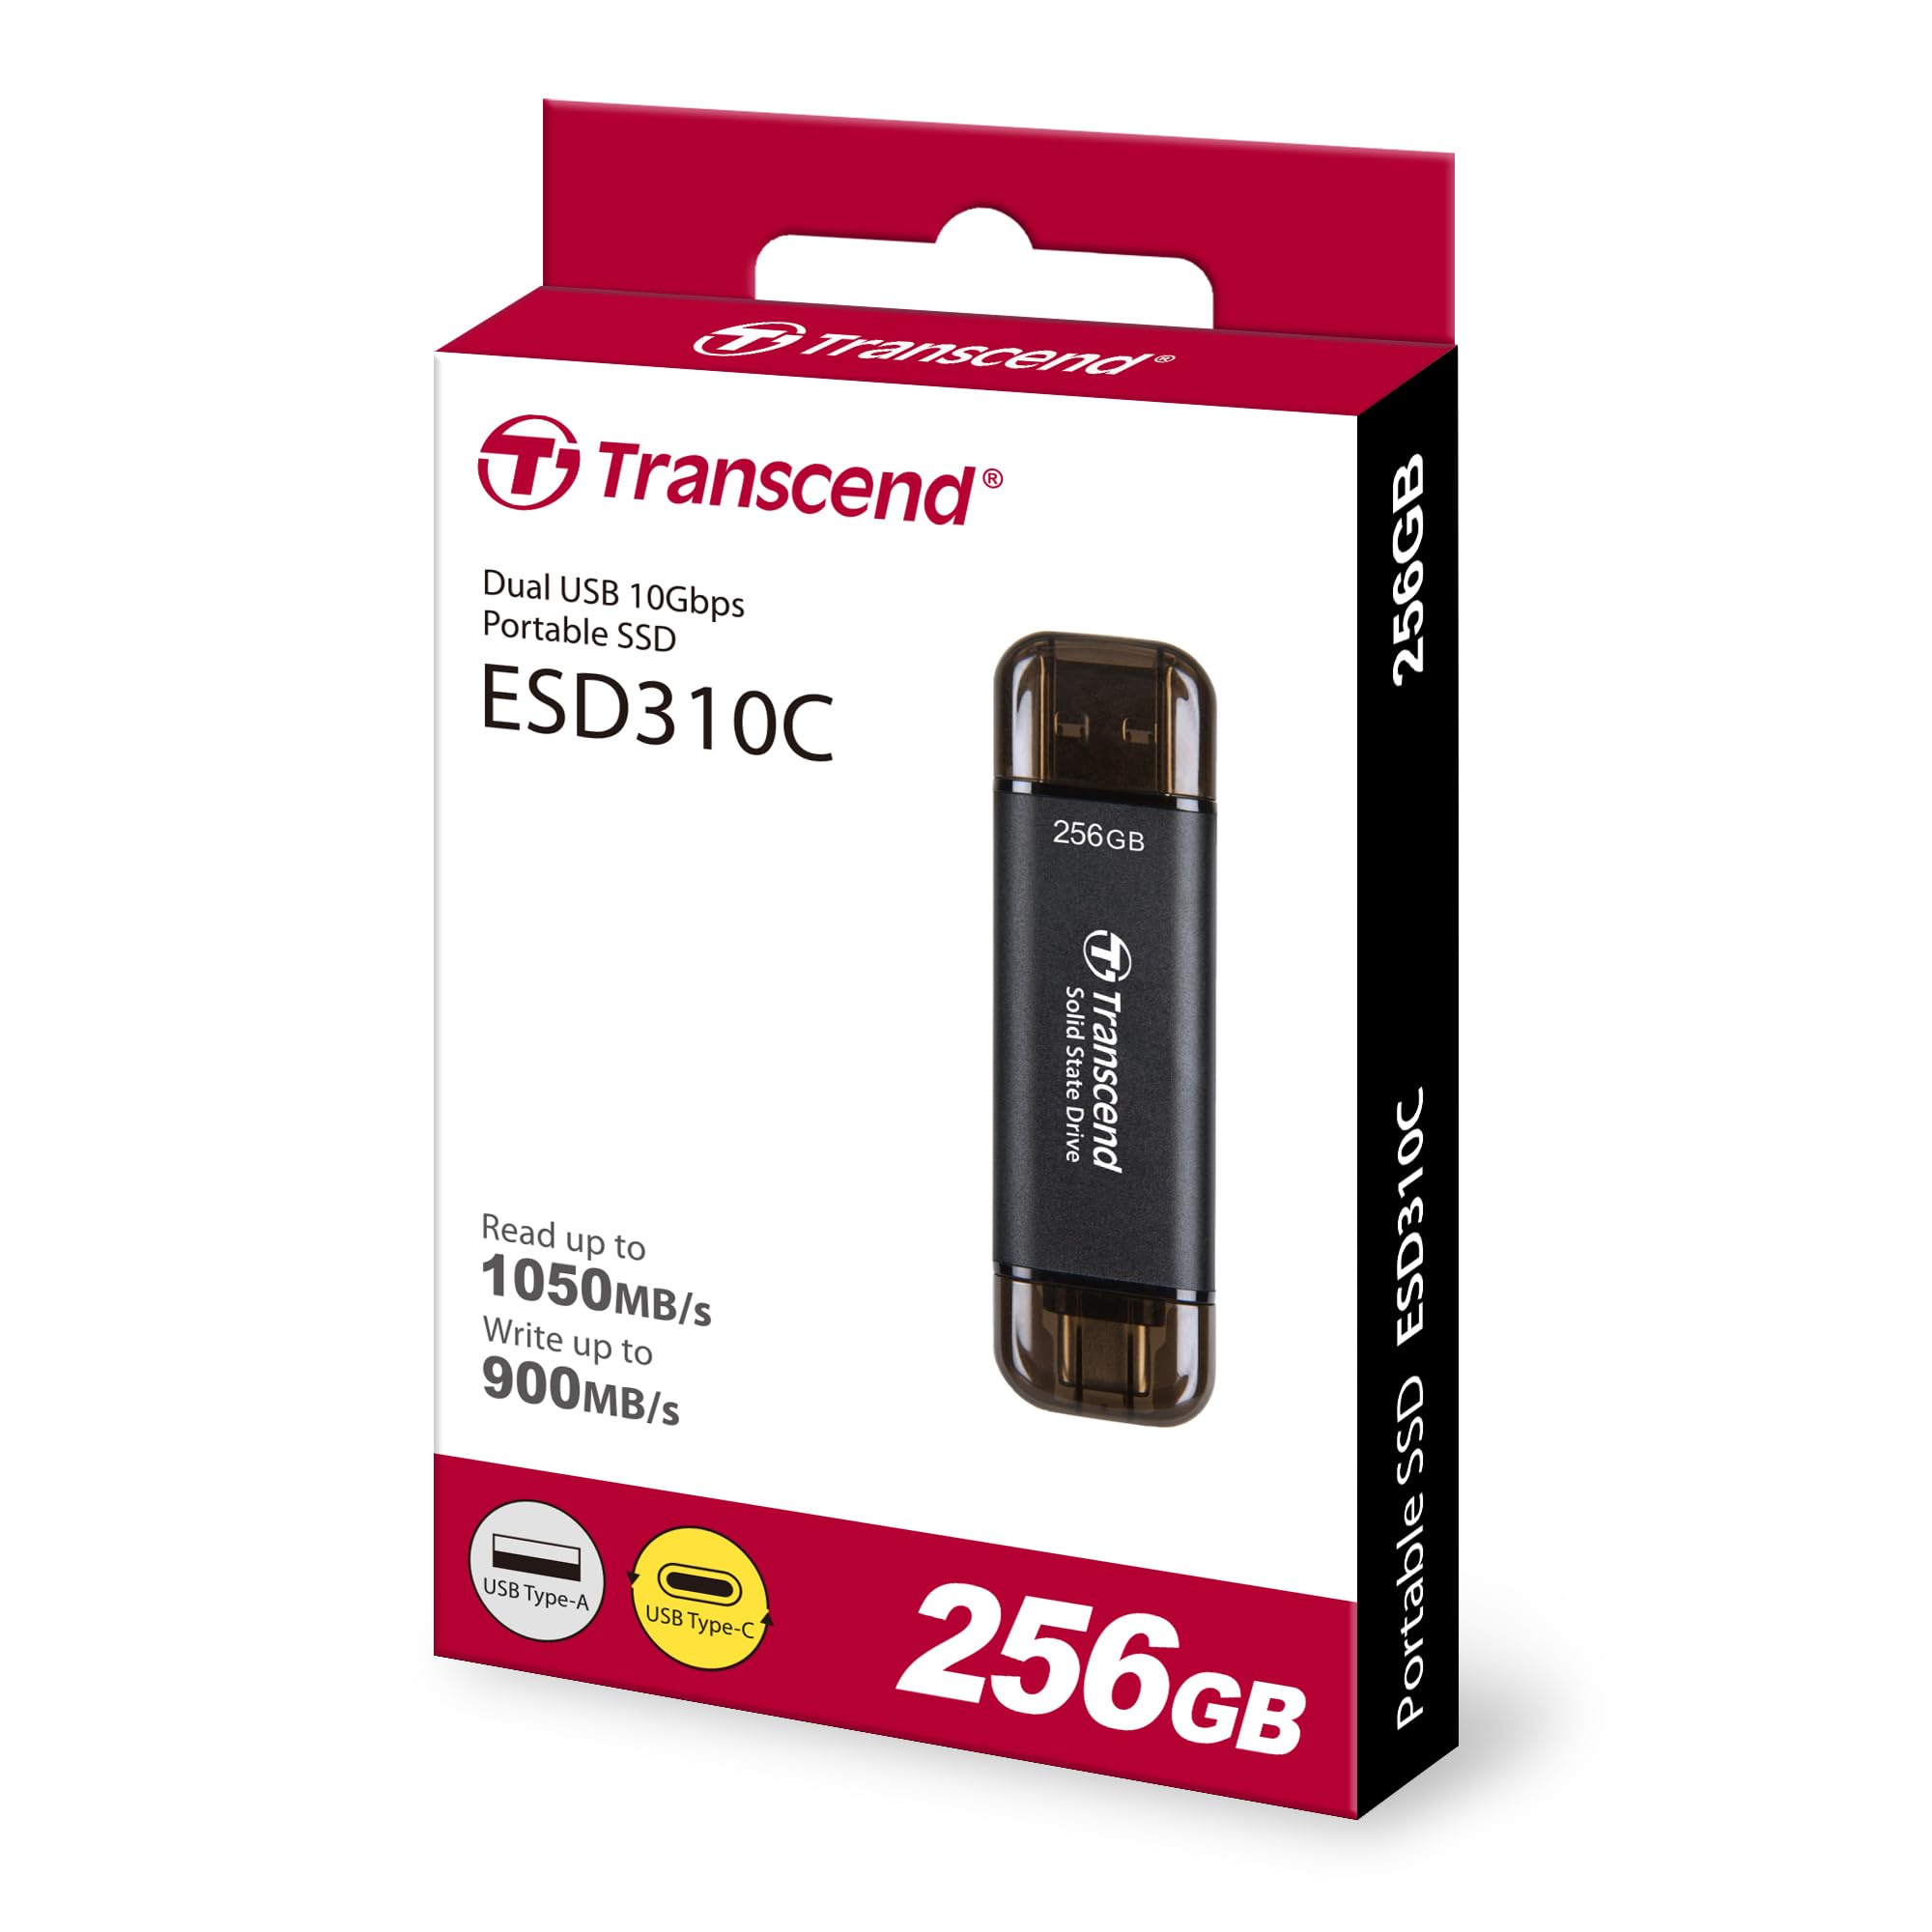 Transcend TS256GESD310C 256GB Portable SSD, ESD310C, USB 10Gbps with Type-C and Type-A